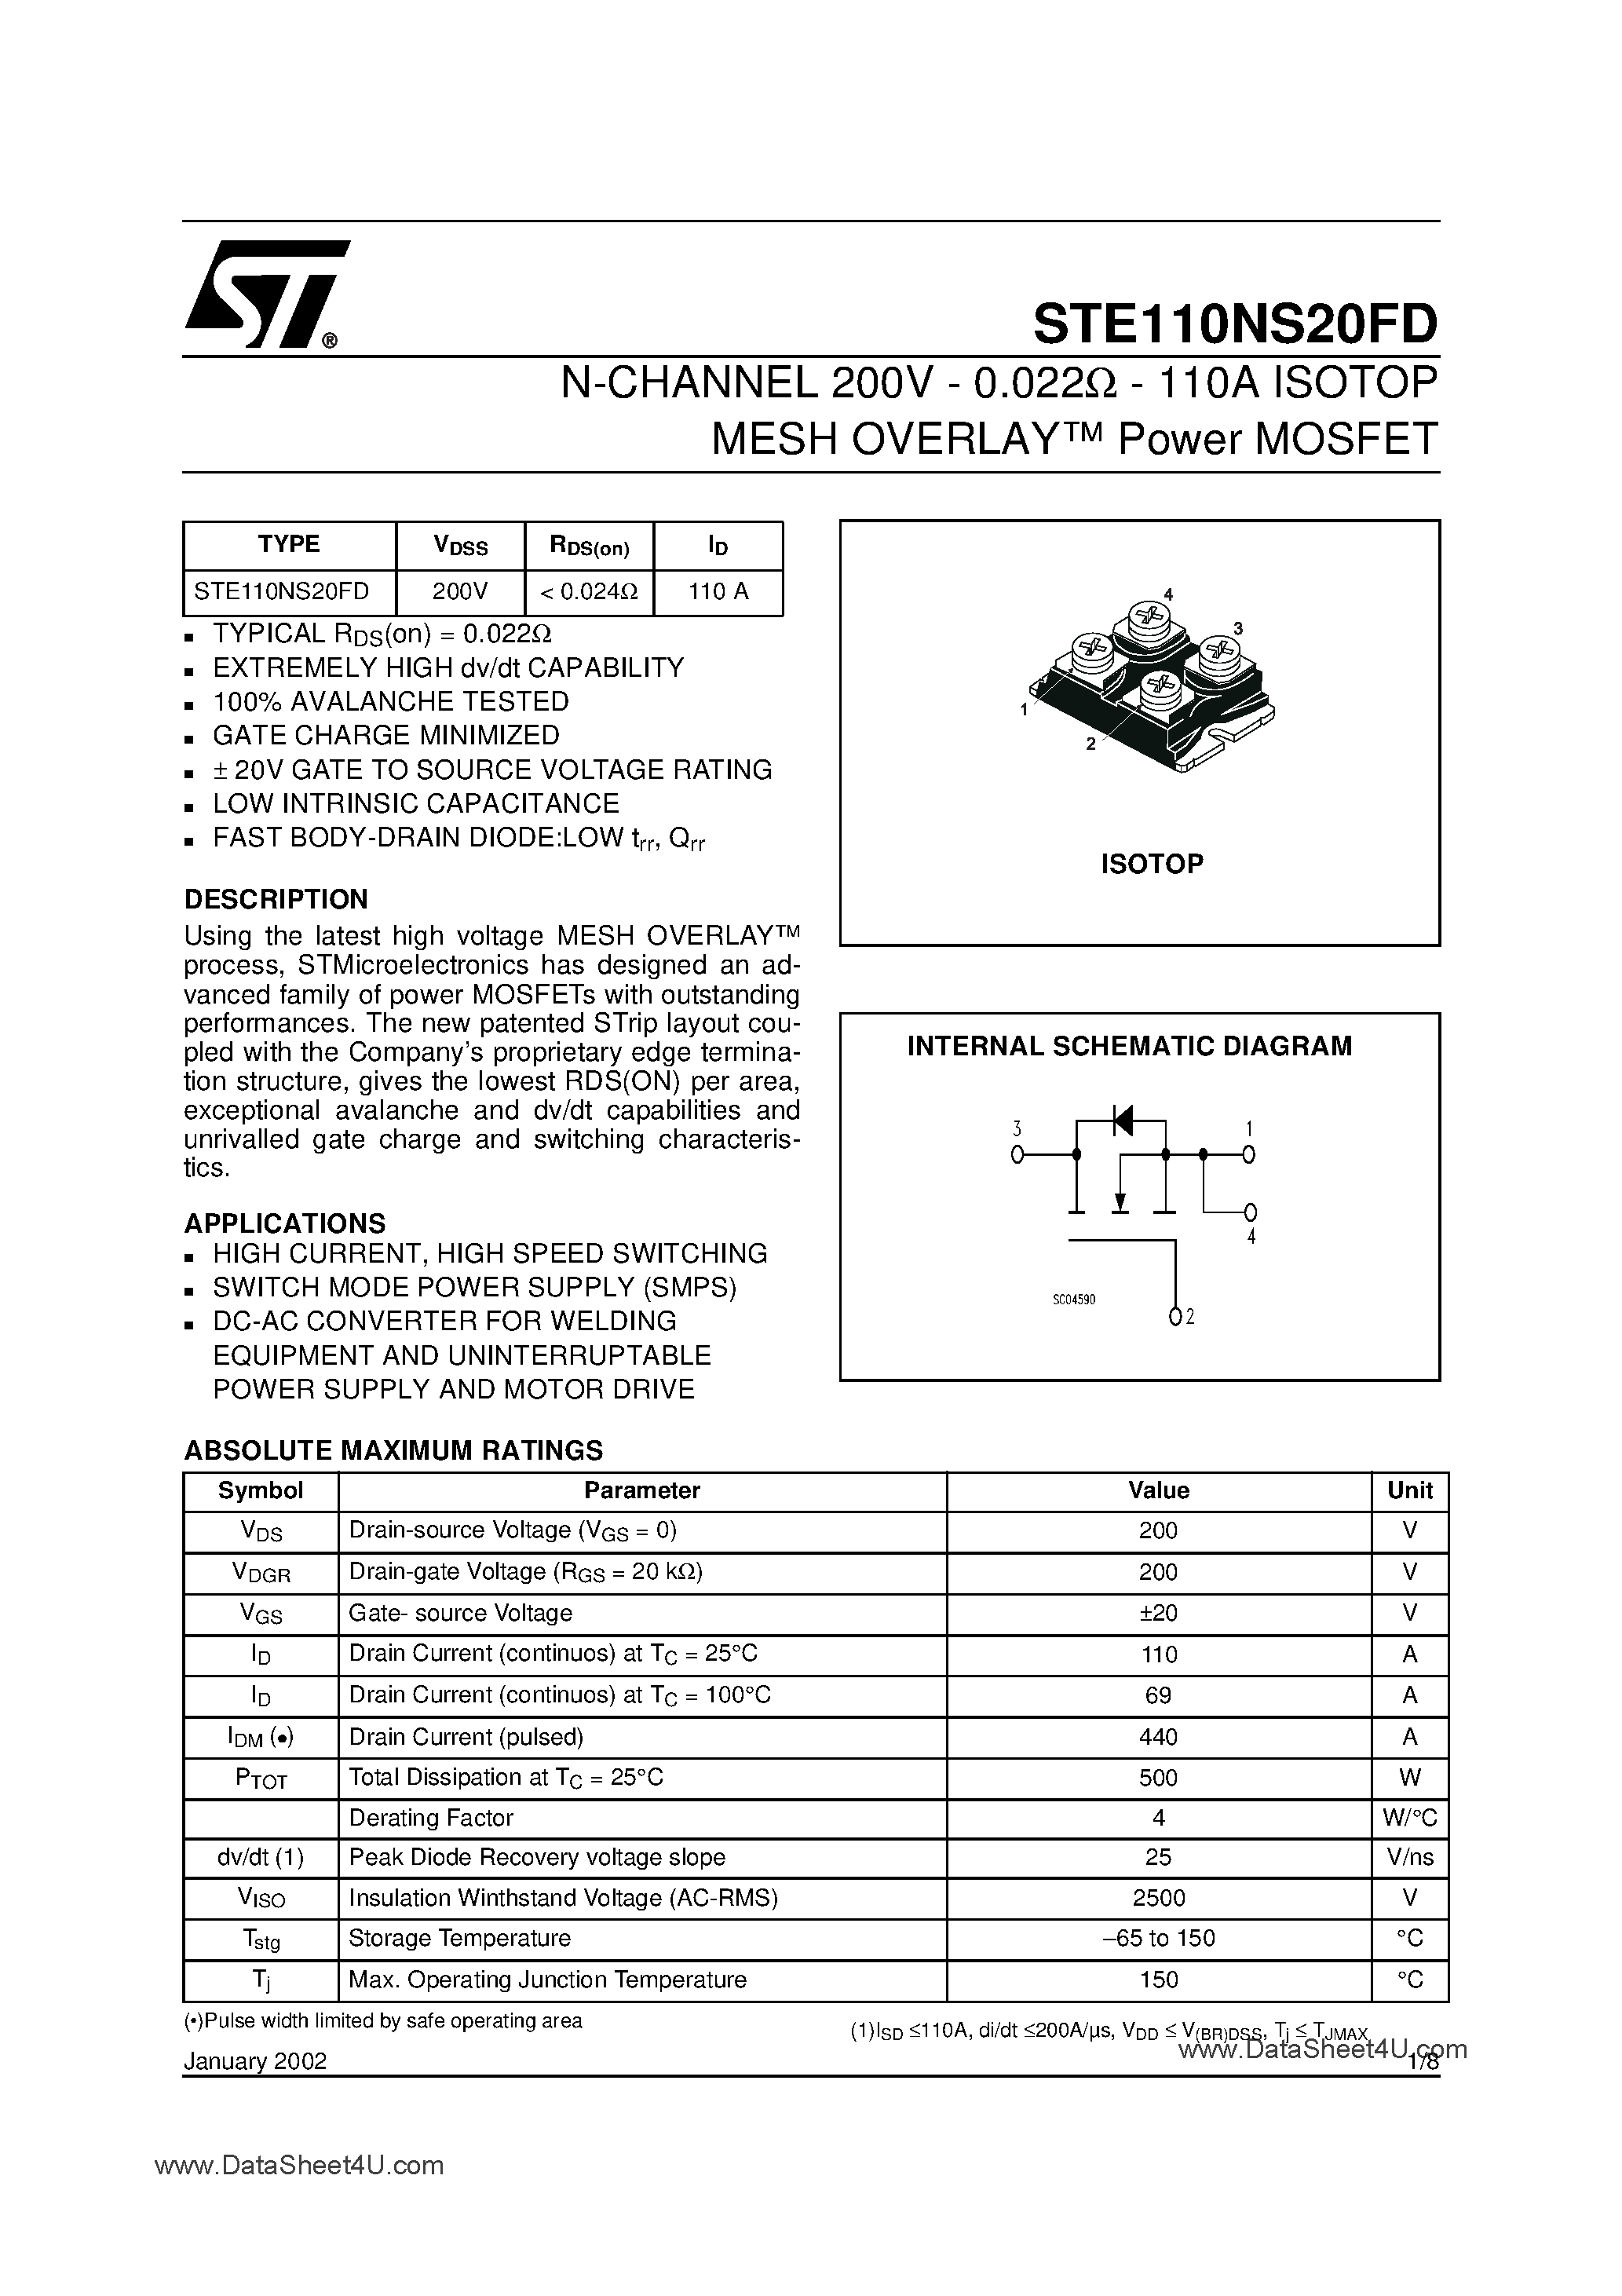 Datasheet STE110NS20FD - N-Channel Power MOSFET page 1